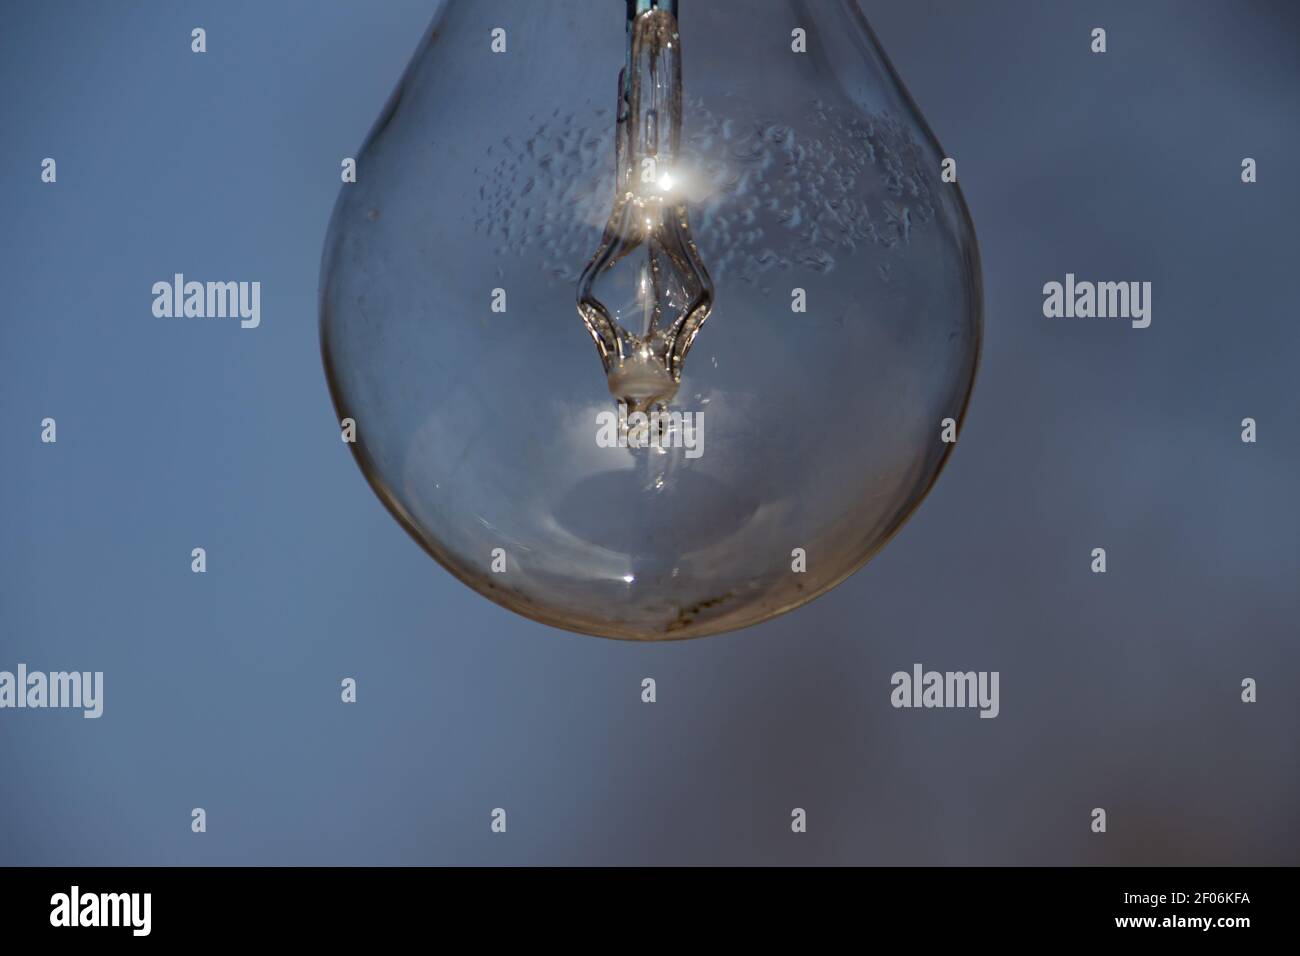 Close up of a vintage lightbulb hanging outdoors with condensation droplets inside Stock Photo